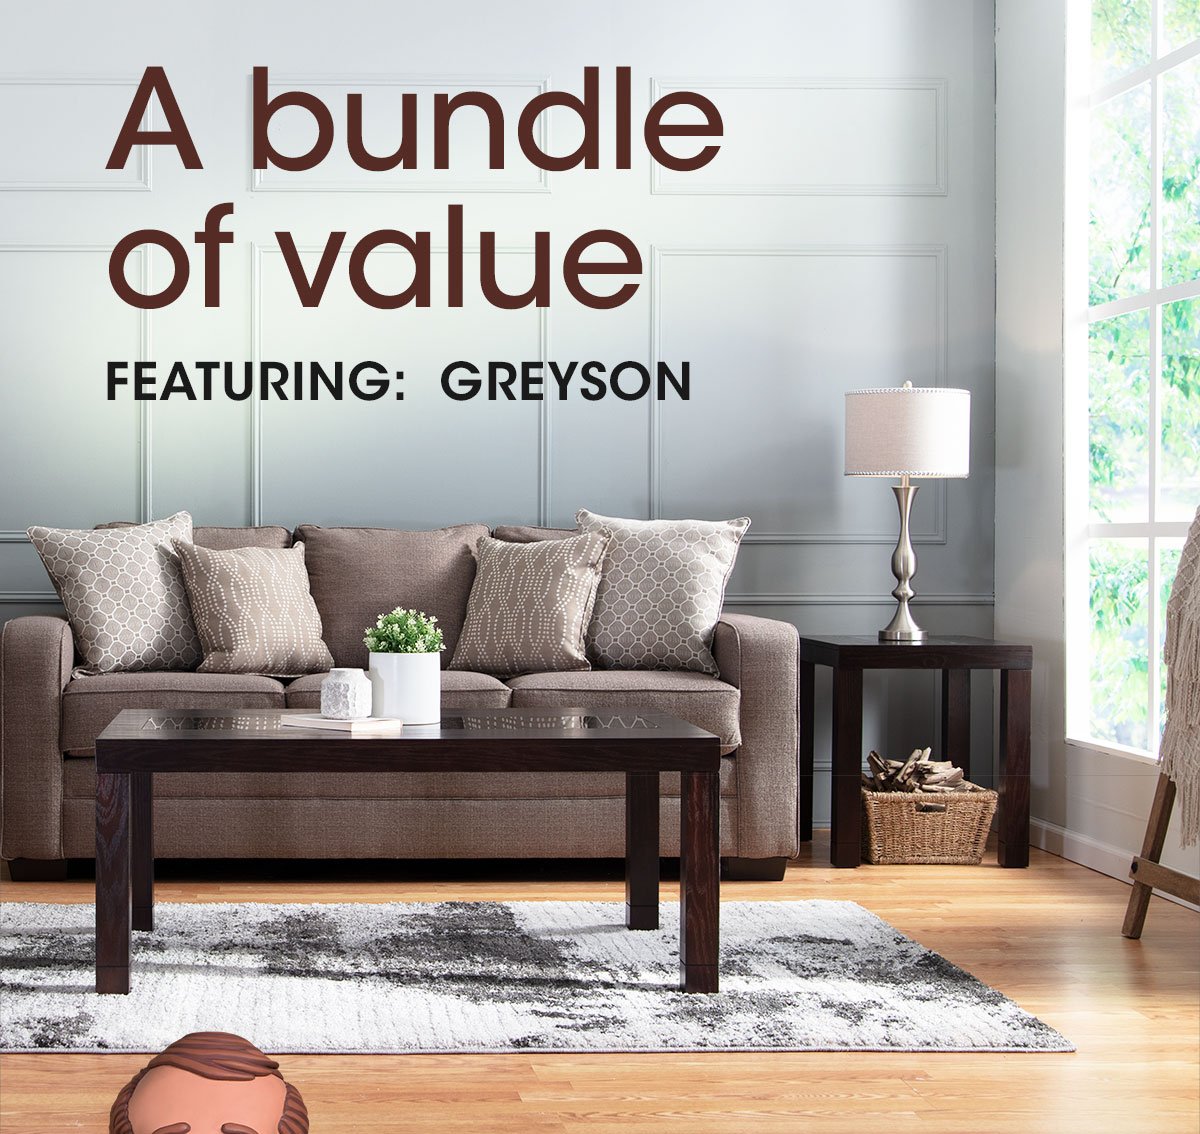 Bobs Discount Furniture My Greyson Complete Living Room Set For Only 999 Milled